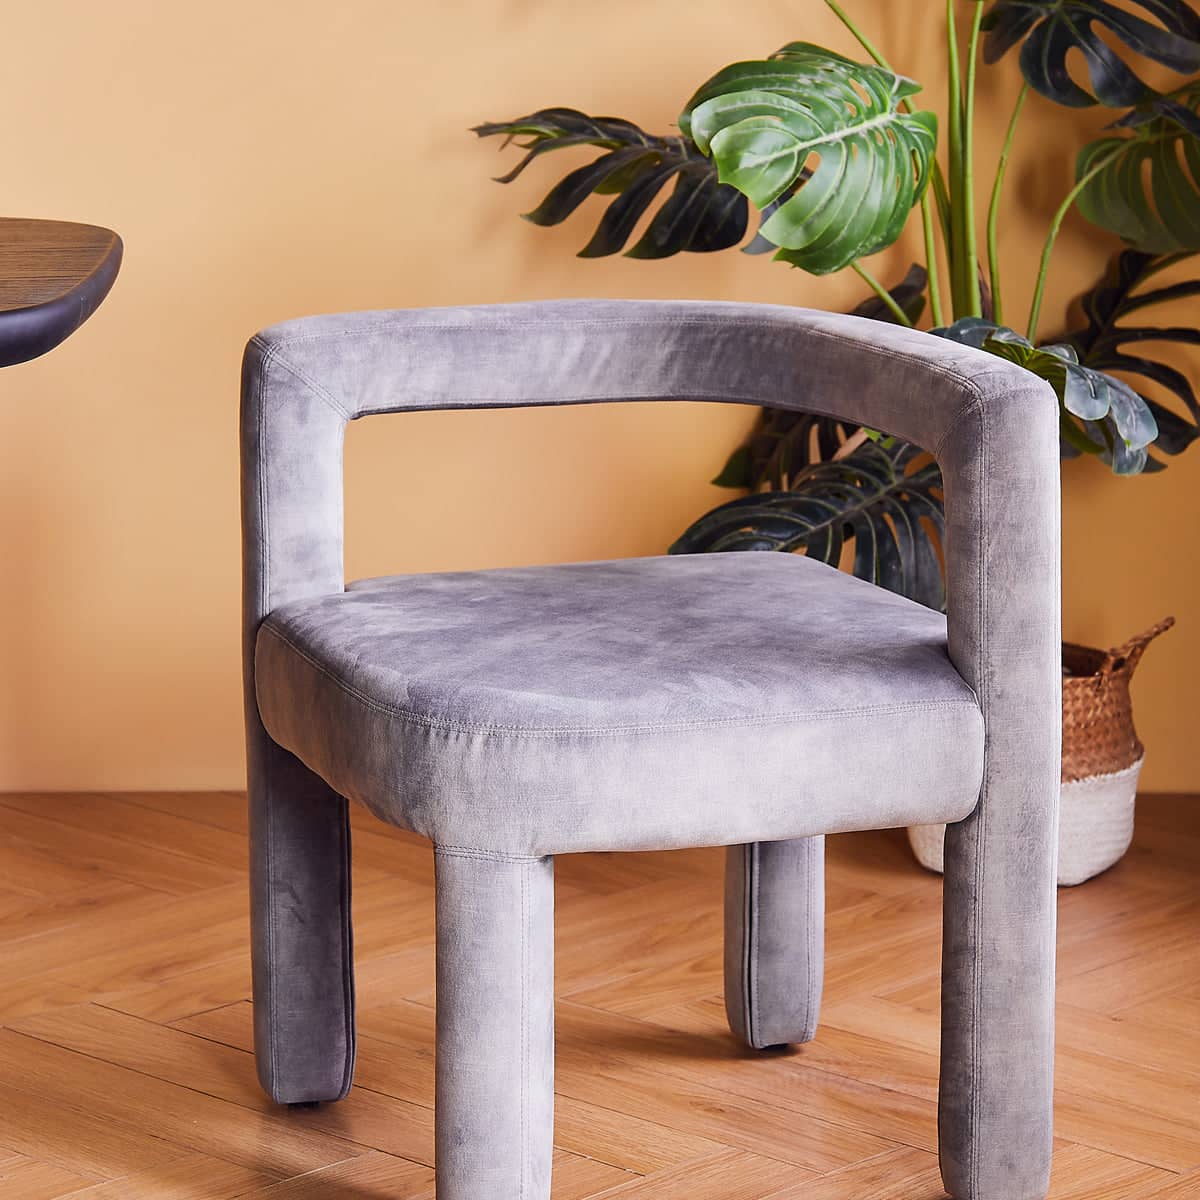 Mate Lounge Chair - Decent Grey